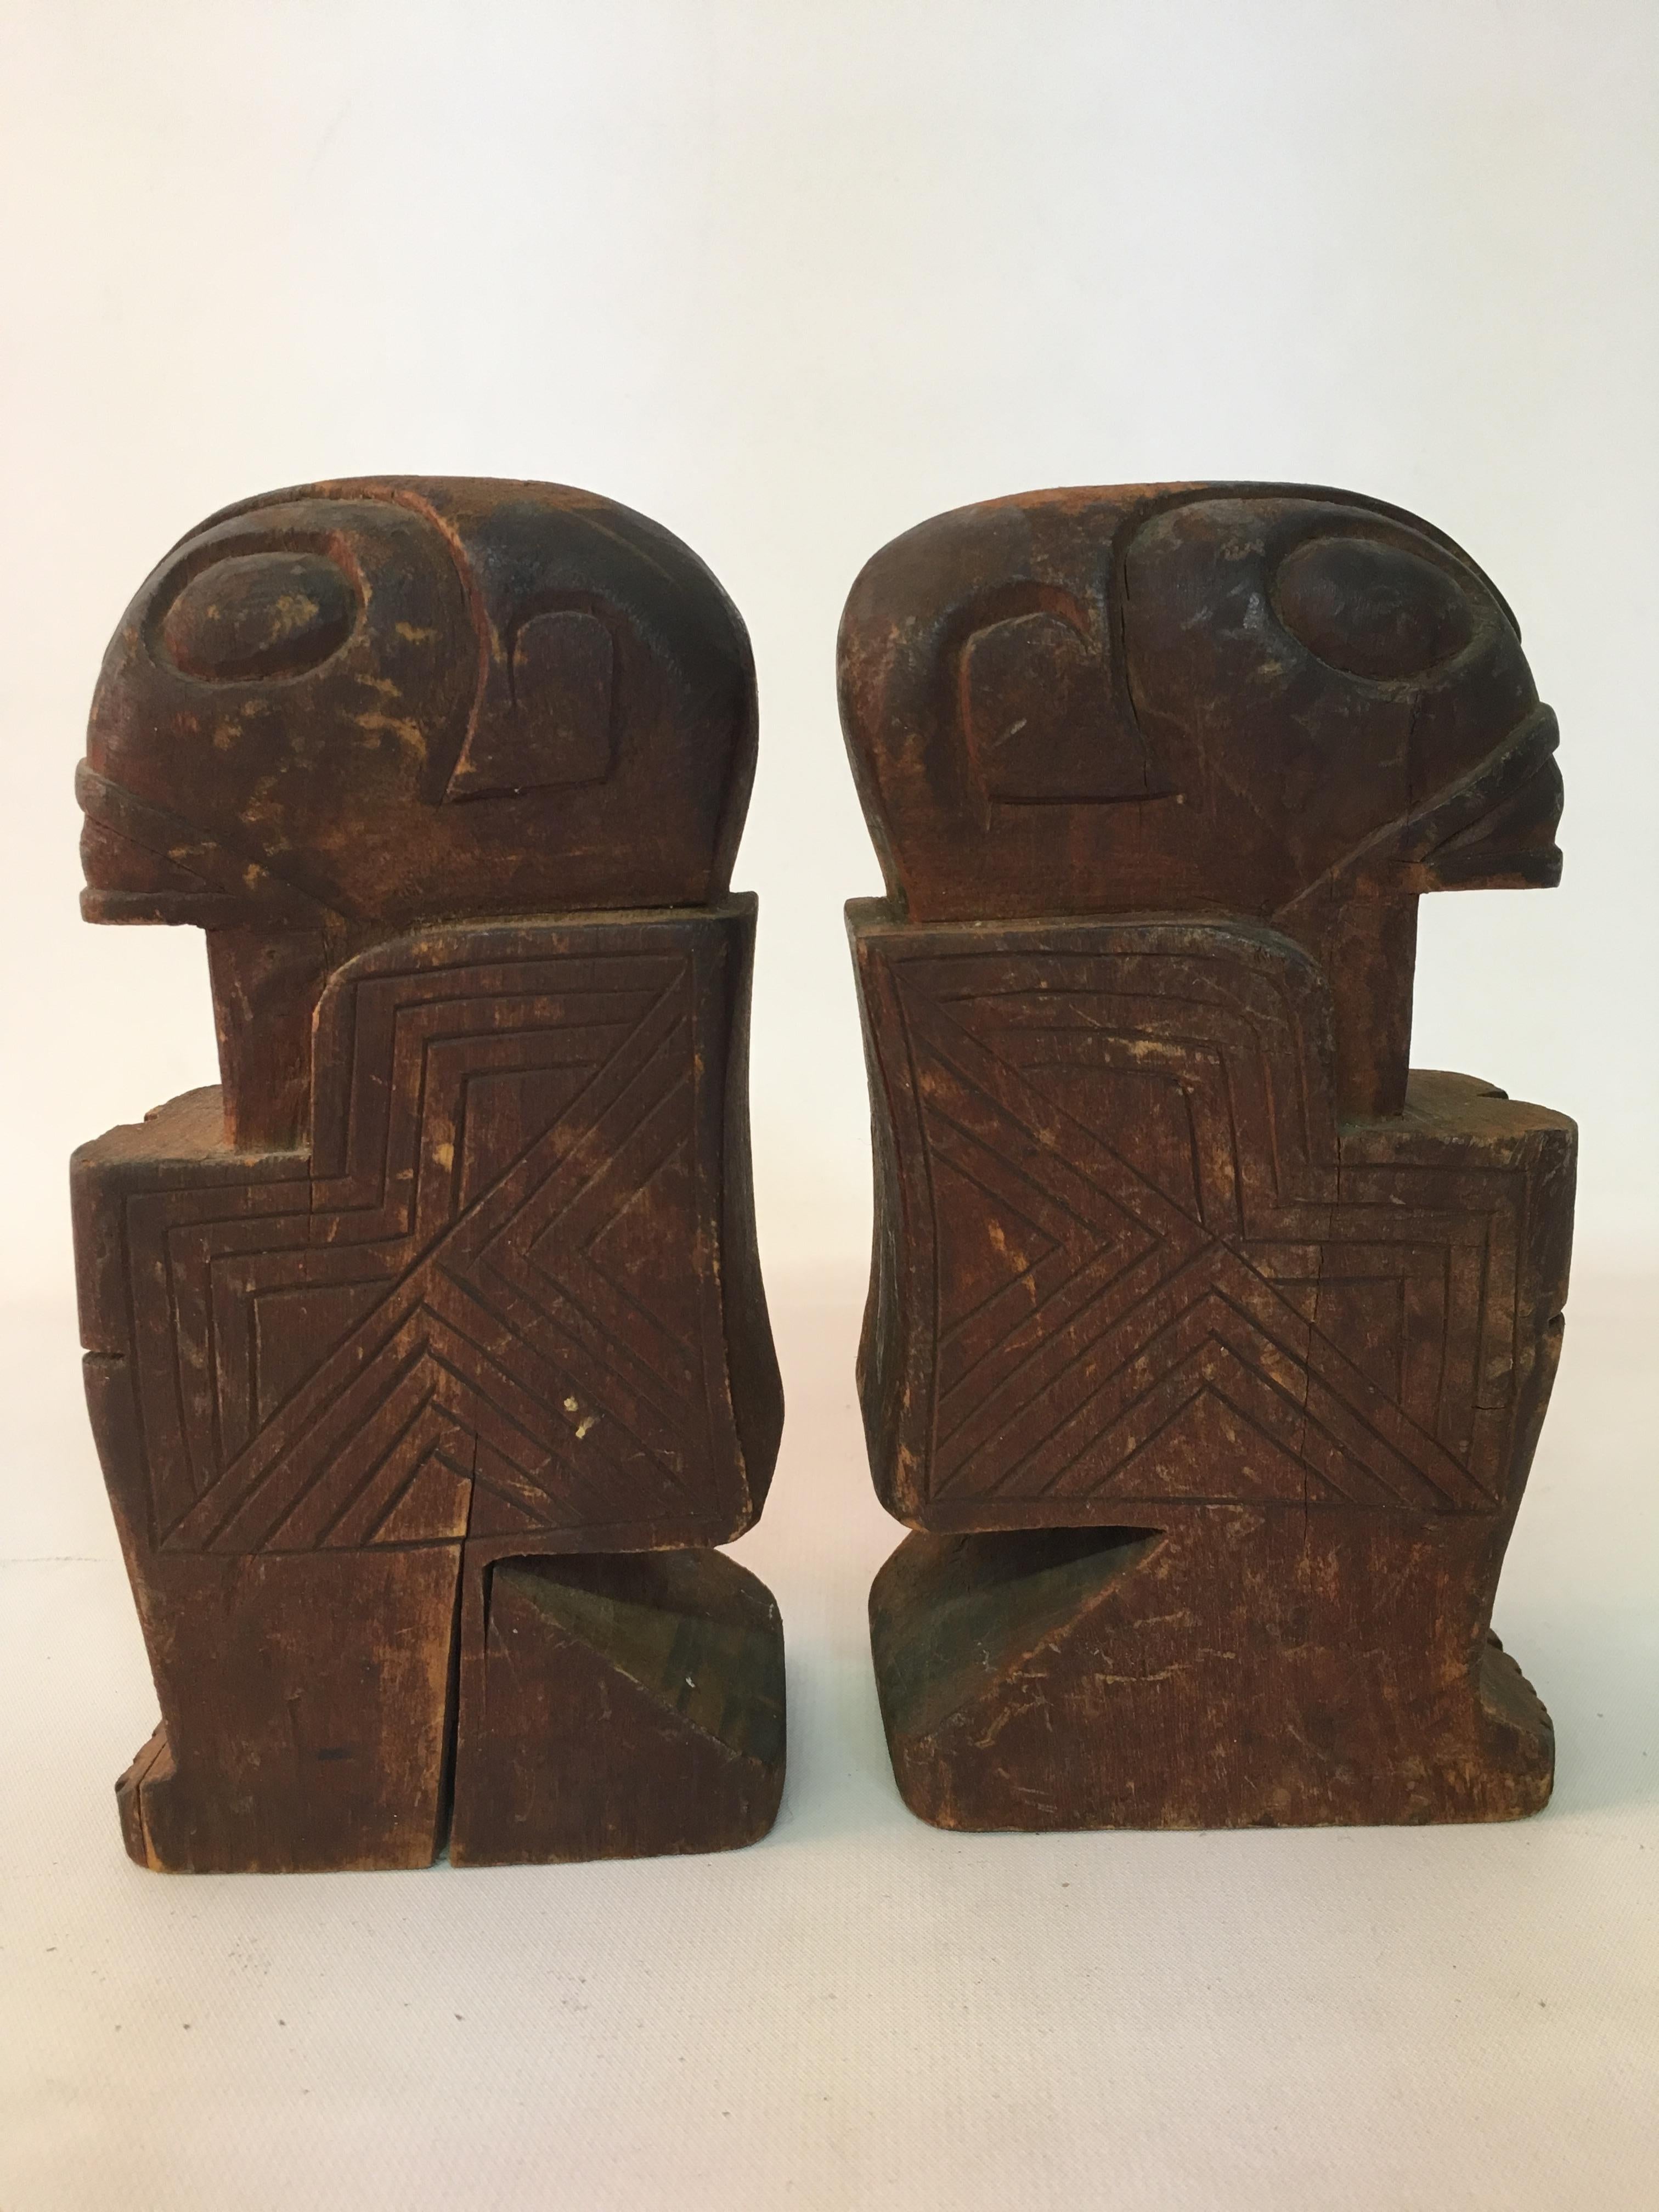 Early Carved Wood Marquesas Islands Votive Figures 2